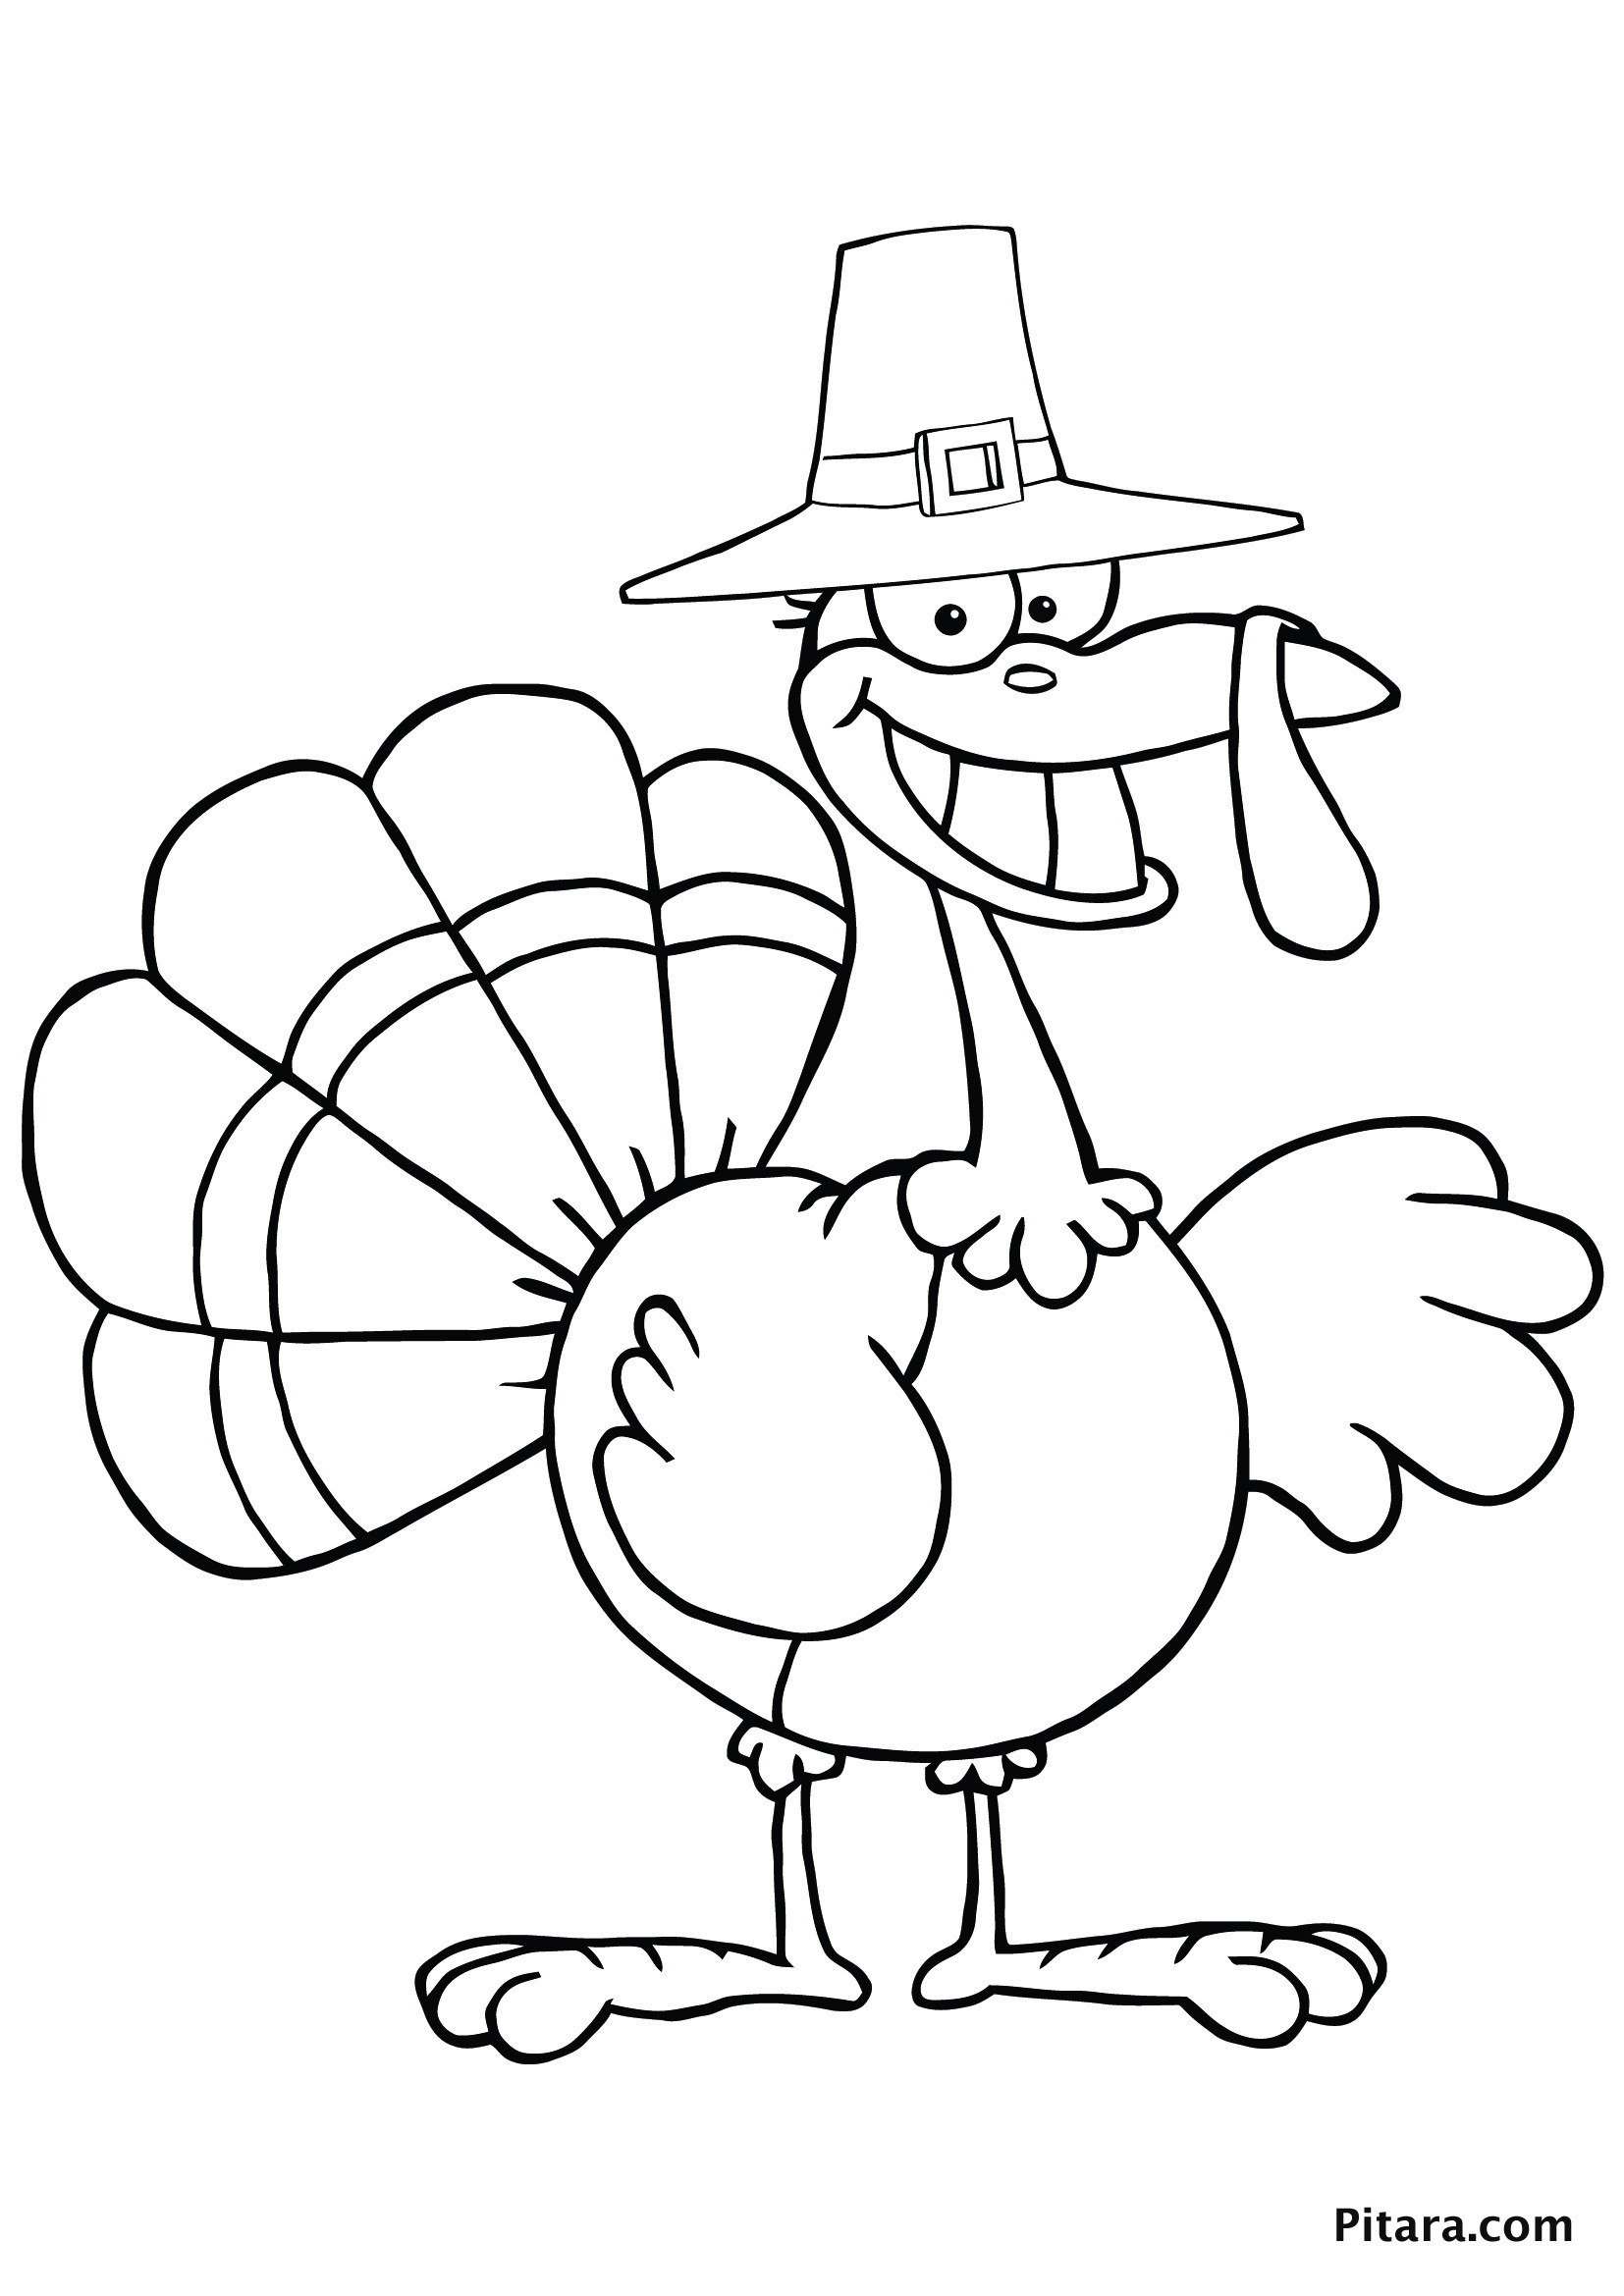 Turkey Coloring Pages For Kids
 Turkey Coloring Pages for Kids